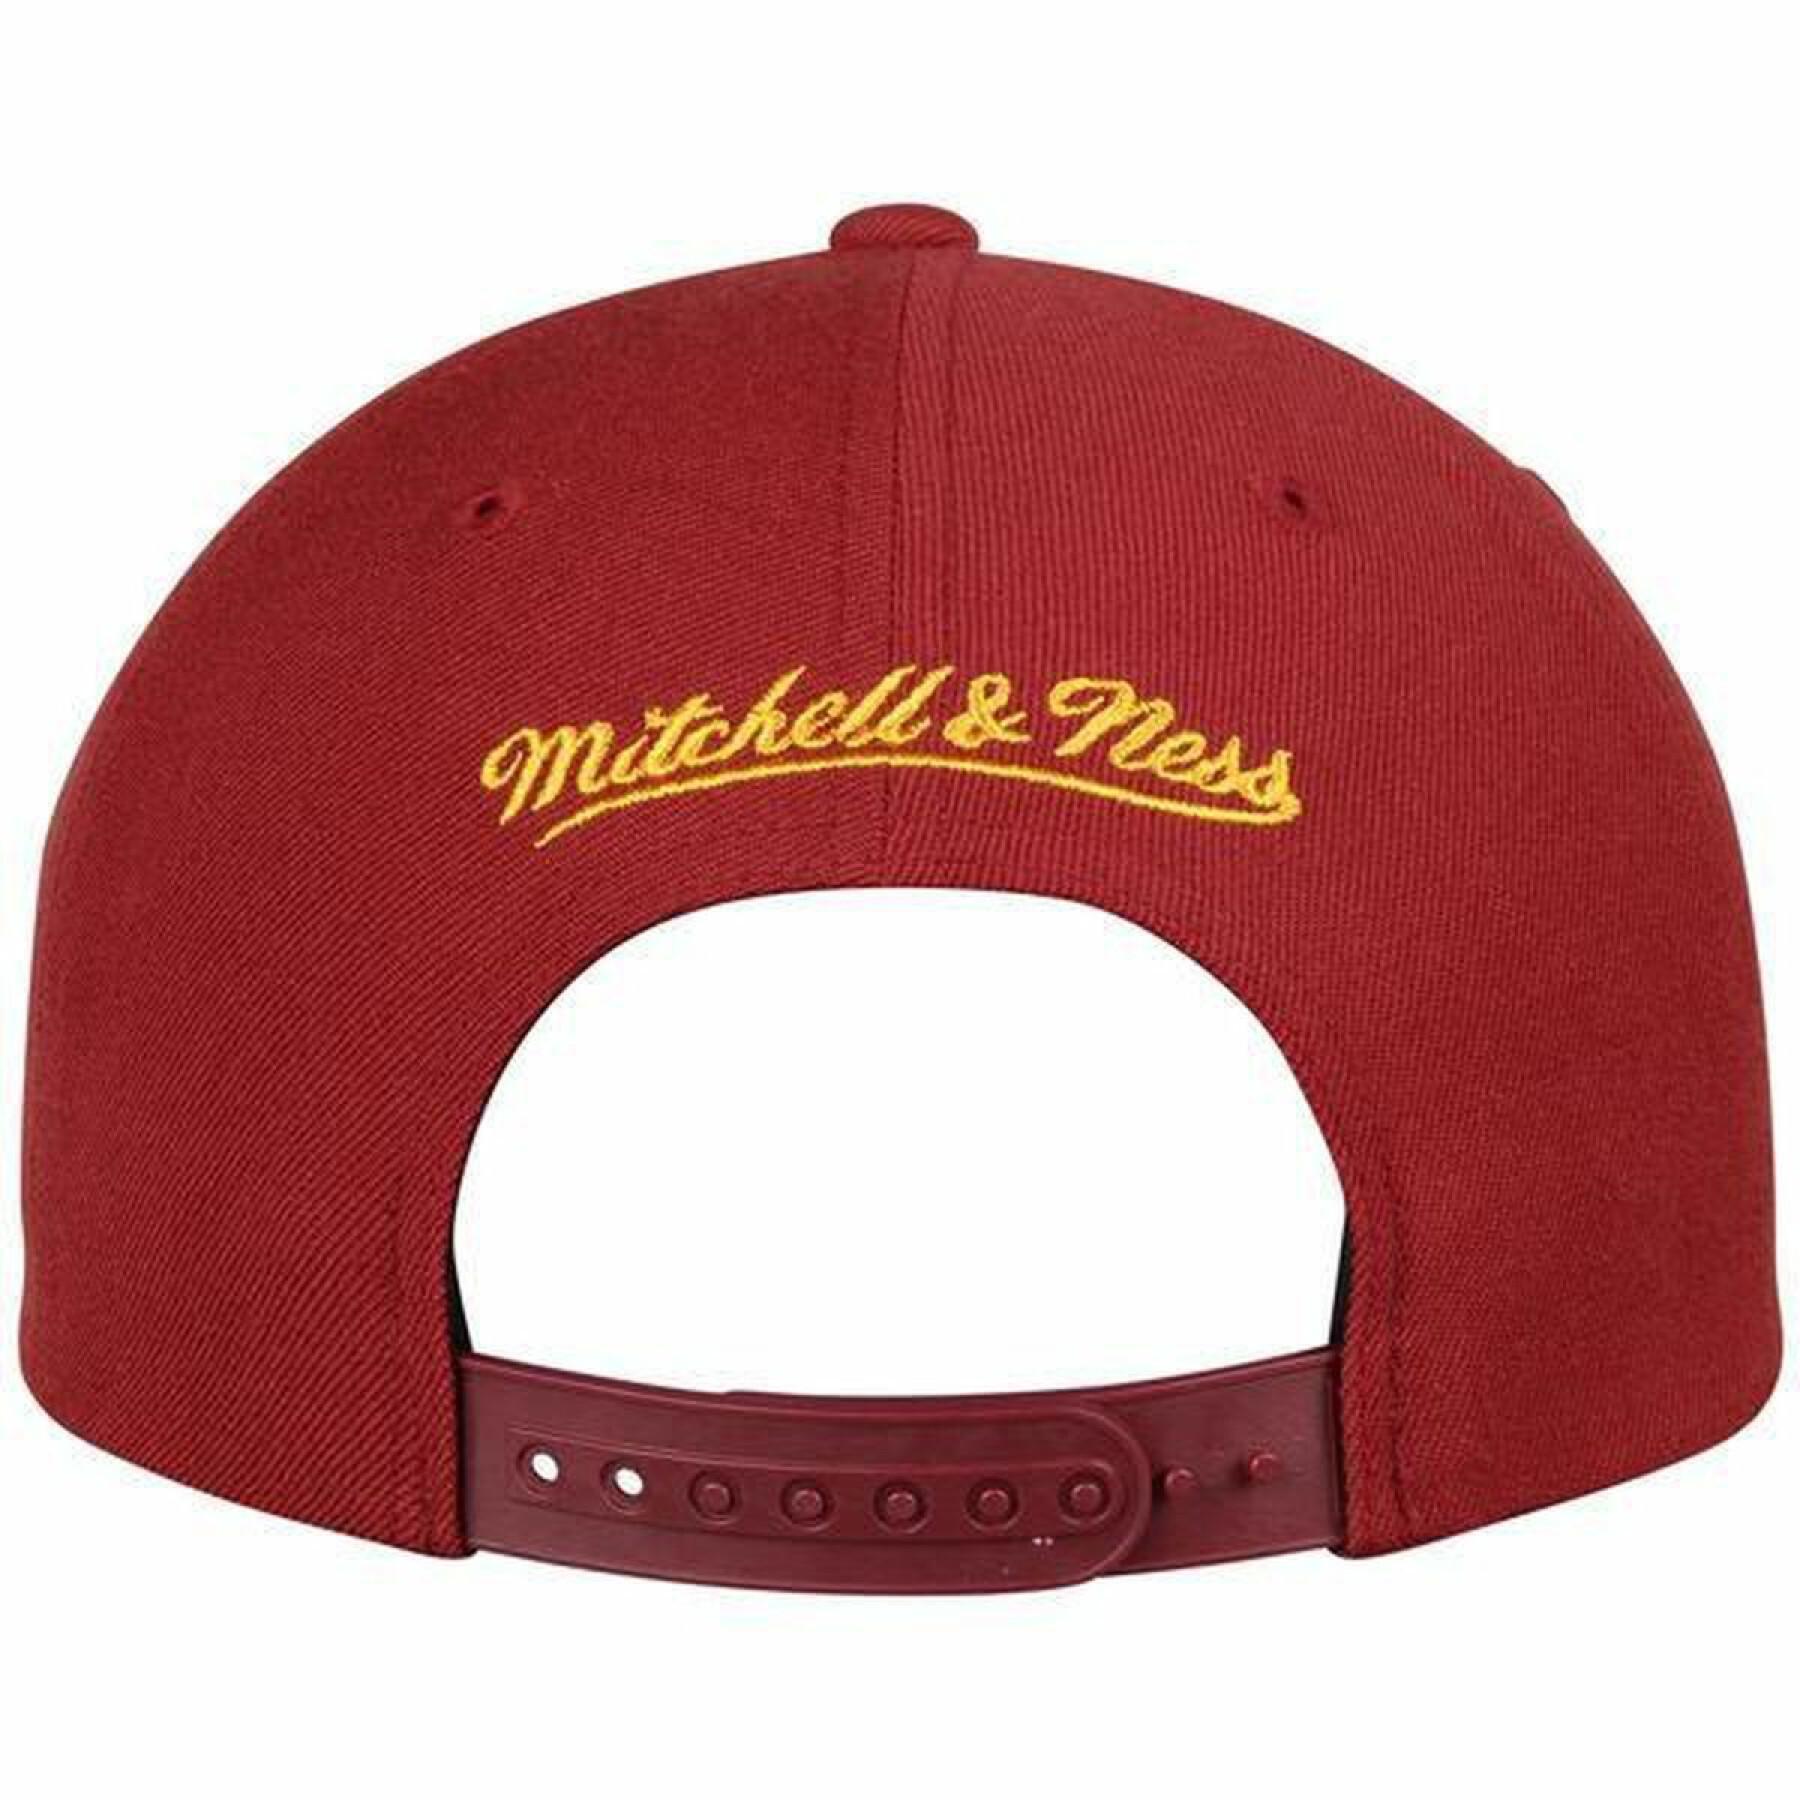 Cap Cleveland Cavaliers wool solid 2